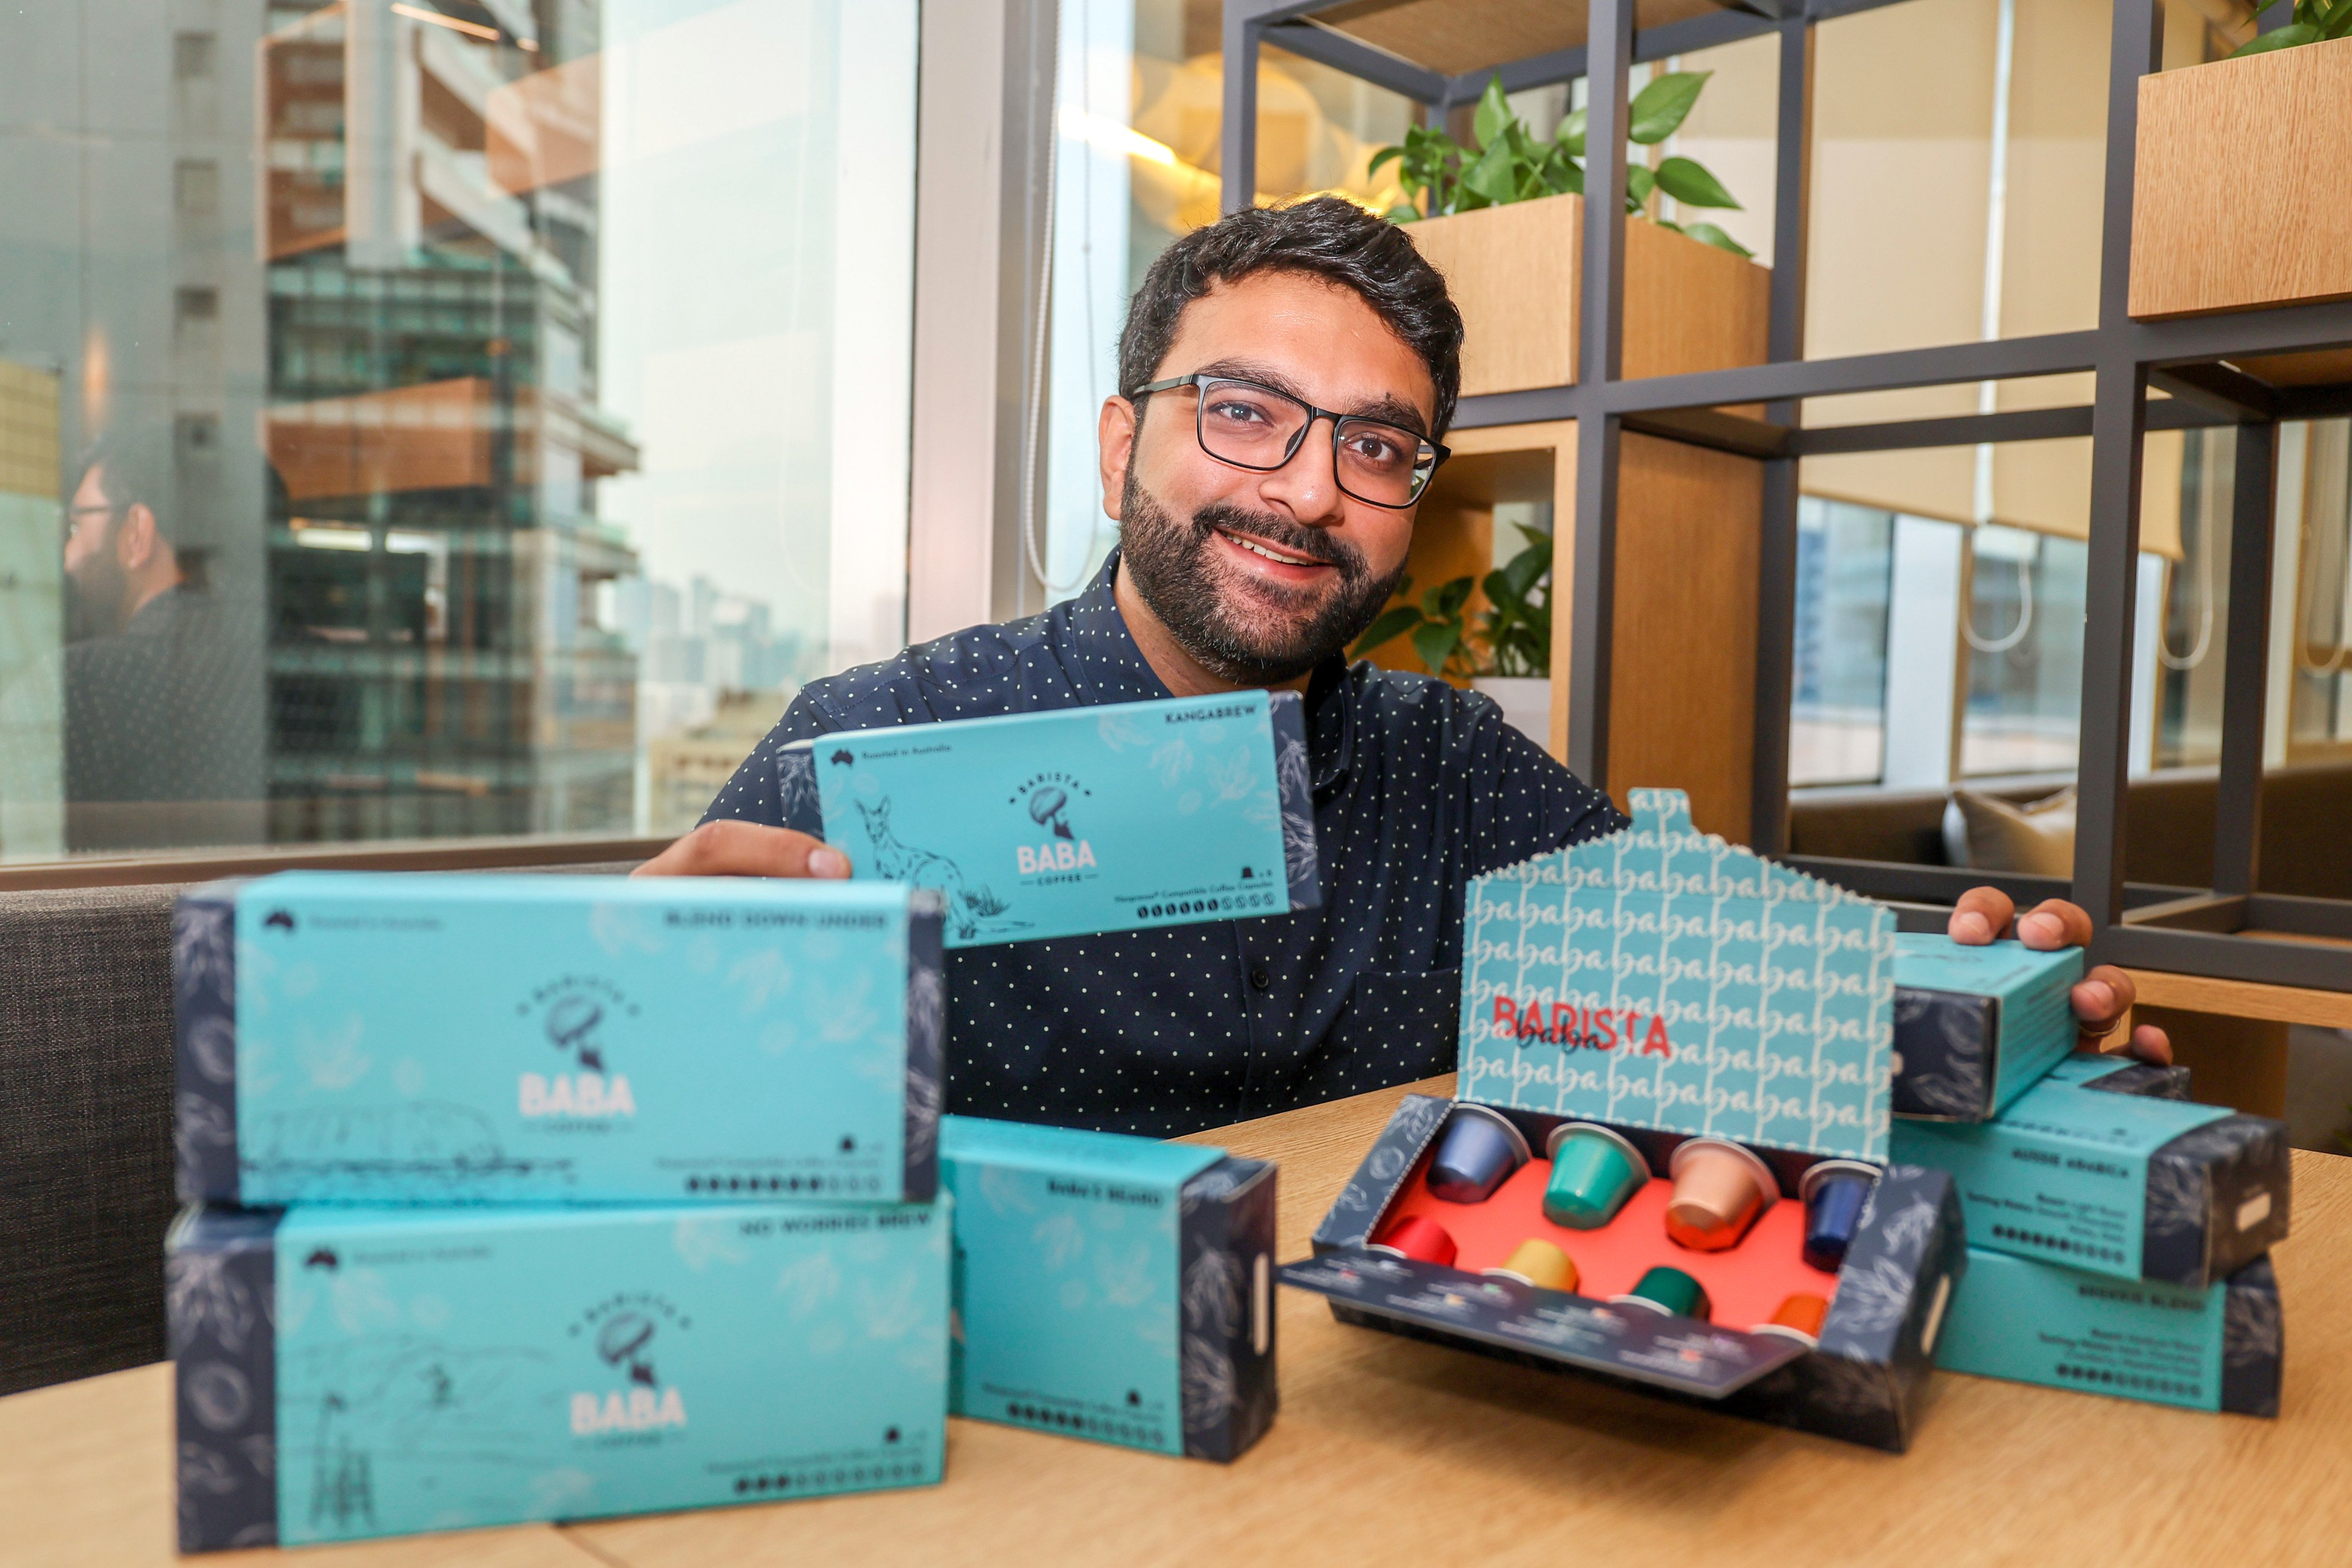 Hong Kong-born entrepreneur Krshna Moriani founded Barista Baba Coffee, which brings Australian-style coffee beans and pods to Hong Kong. In doing so he opted not to run his late father’s watch import-export business.  Photo: Edmond So